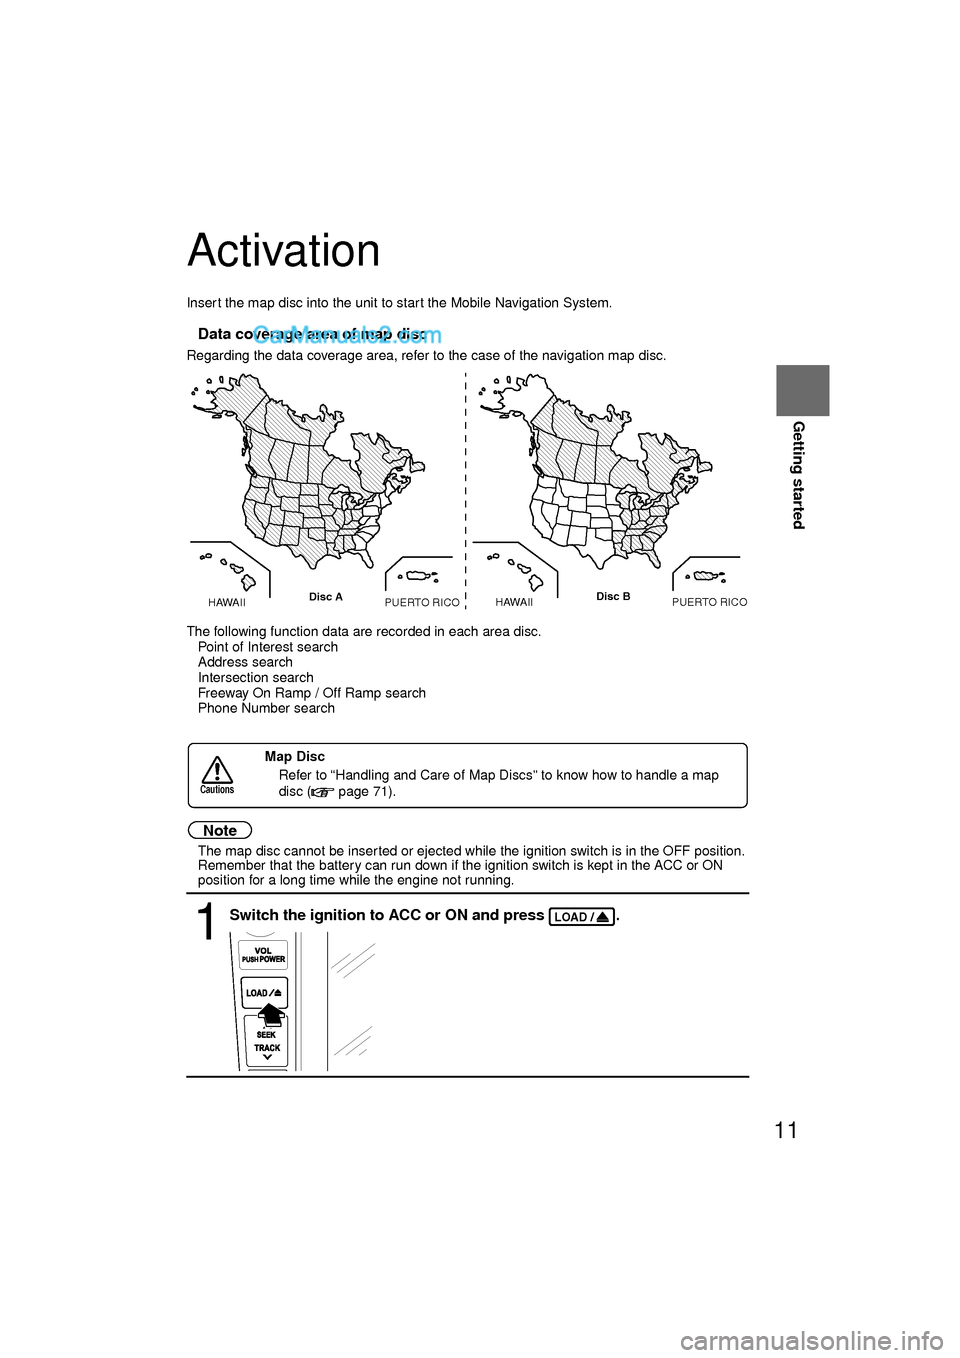 MAZDA MODEL CX-9 2010  Navigation Manual (in English) 11
Getting started
Activation
Insert the map disc into the unit to start the Mobile Navigation System.
nData coverage area of map disc
Regarding the data coverage area, refer to the case of the naviga